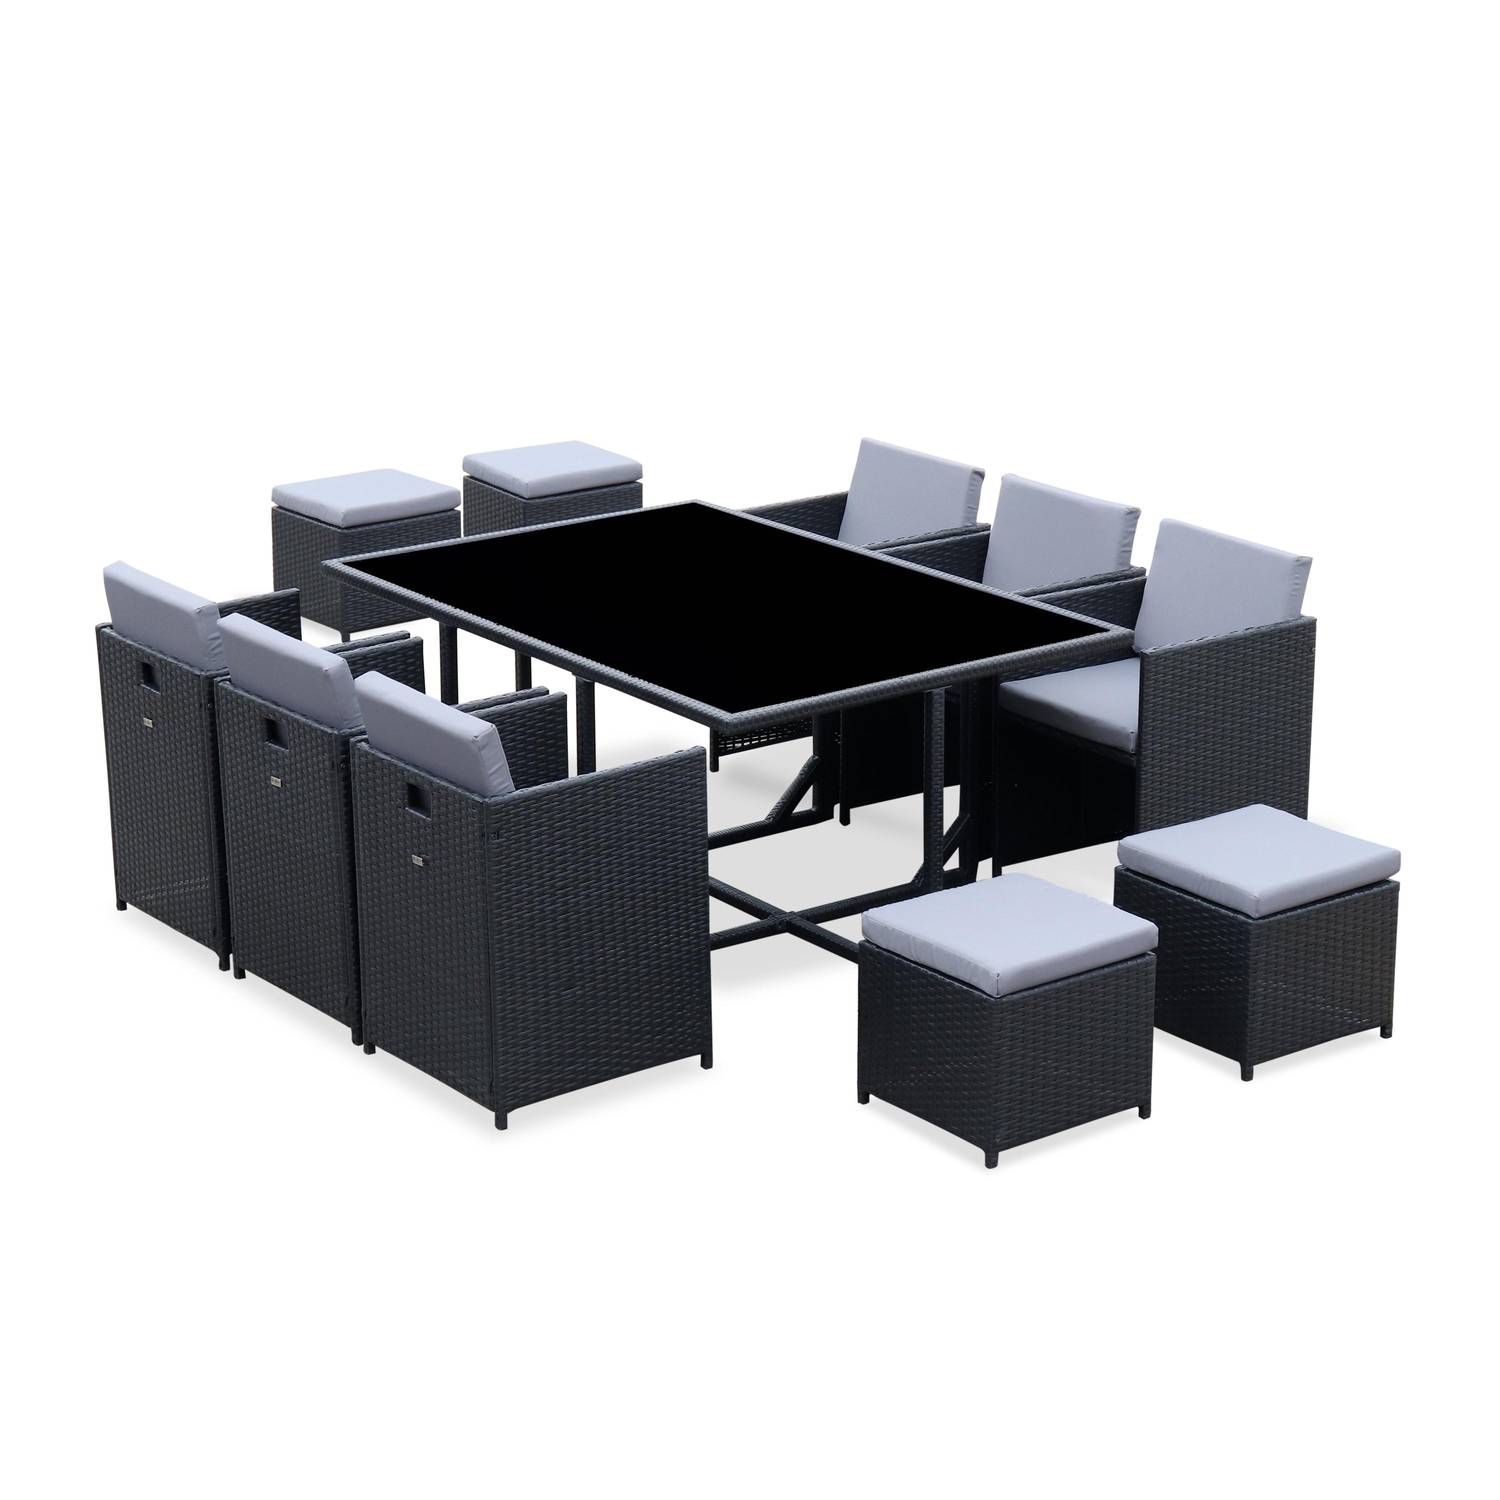 6 to 10-seater rattan cube table set - table, 6 armchairs, 2 footstools - Vabo 10 - Black rattan, Grey cushions Photo2